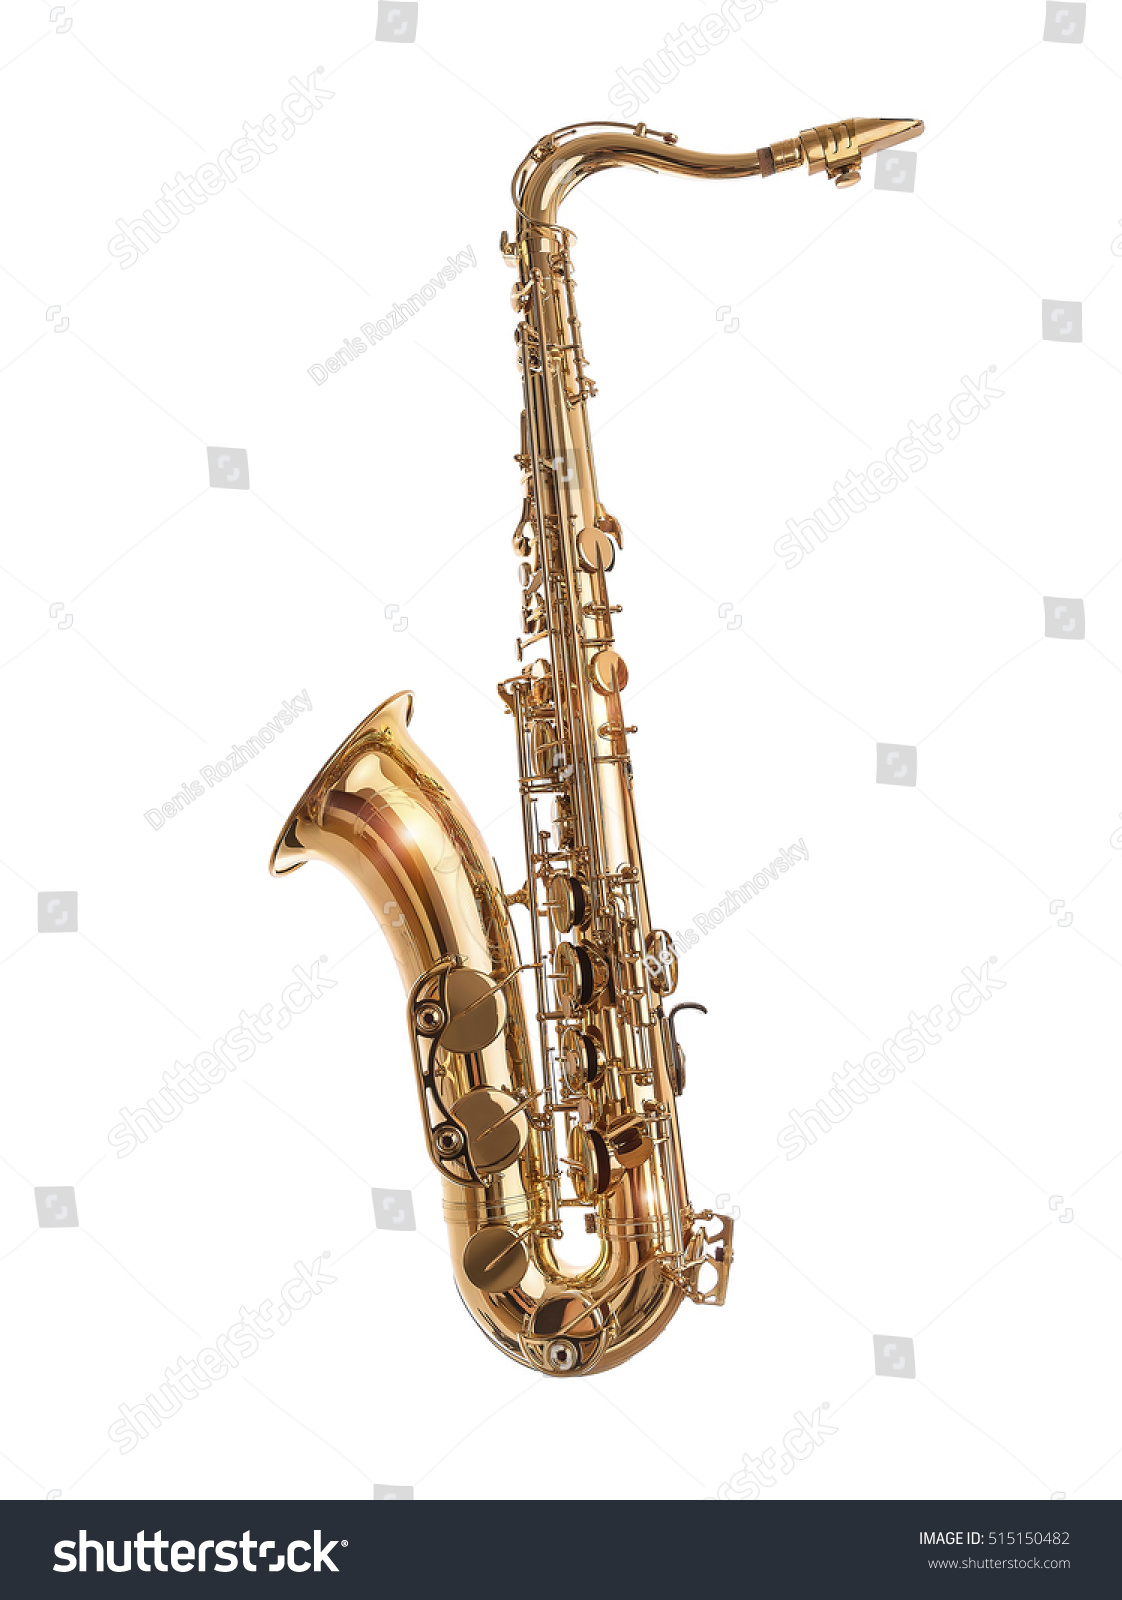 Golden Saxophone isolated on a white background. #515150482